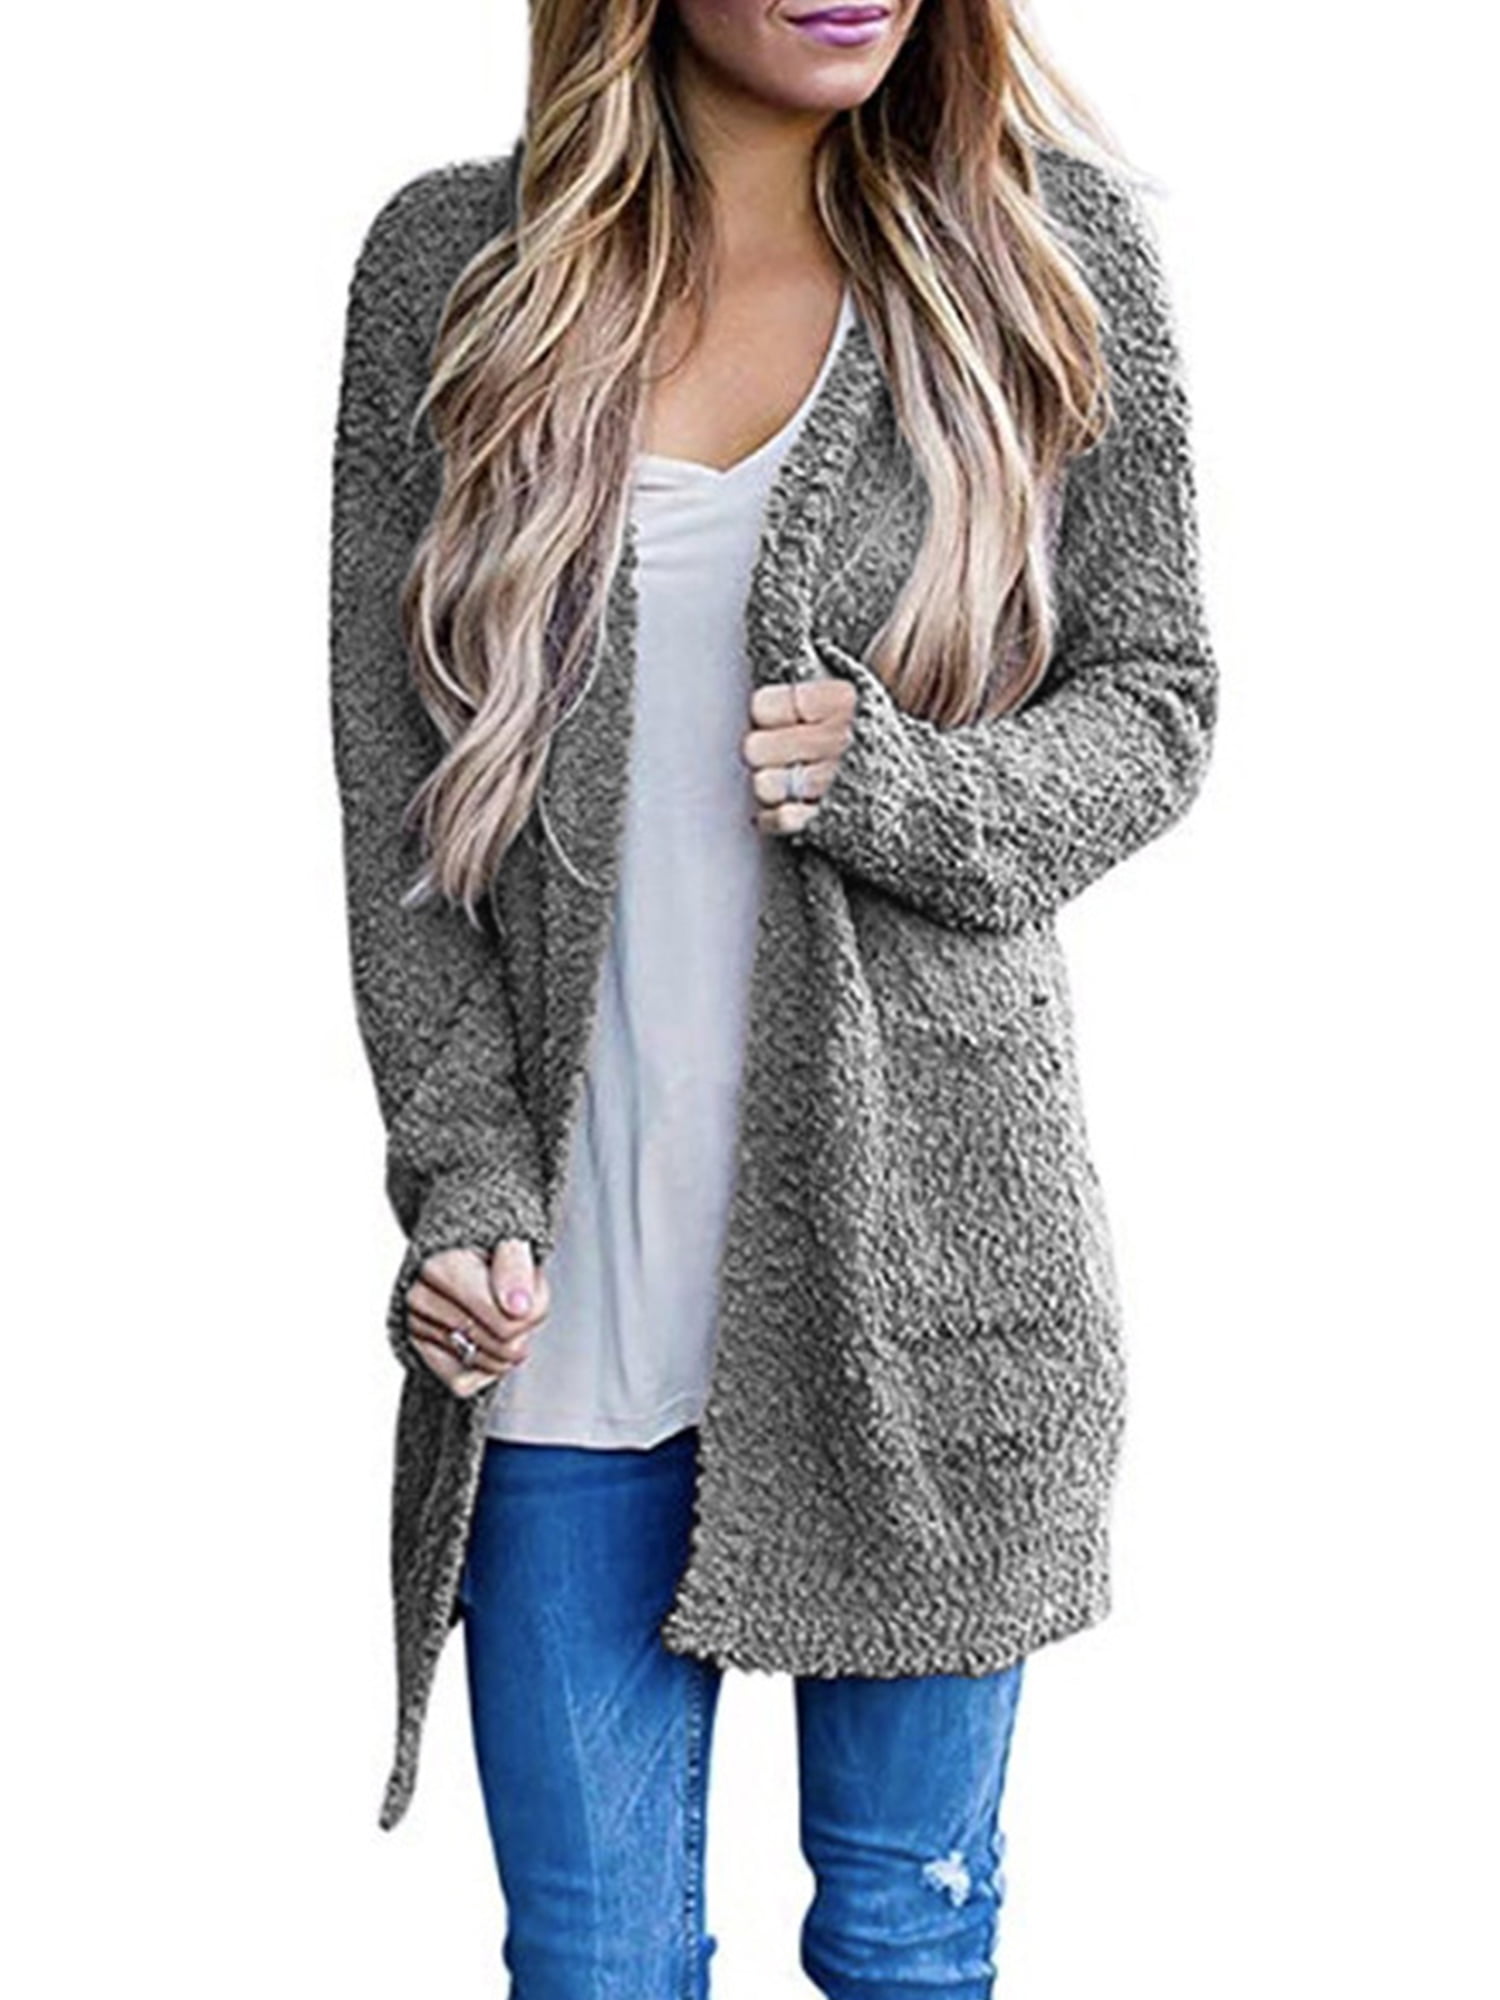 LIWEIKE Womens Loose Open Front Cardigan Long Sleeve Casual Lightweight Soft Knit Sweaters Coat with Pockets